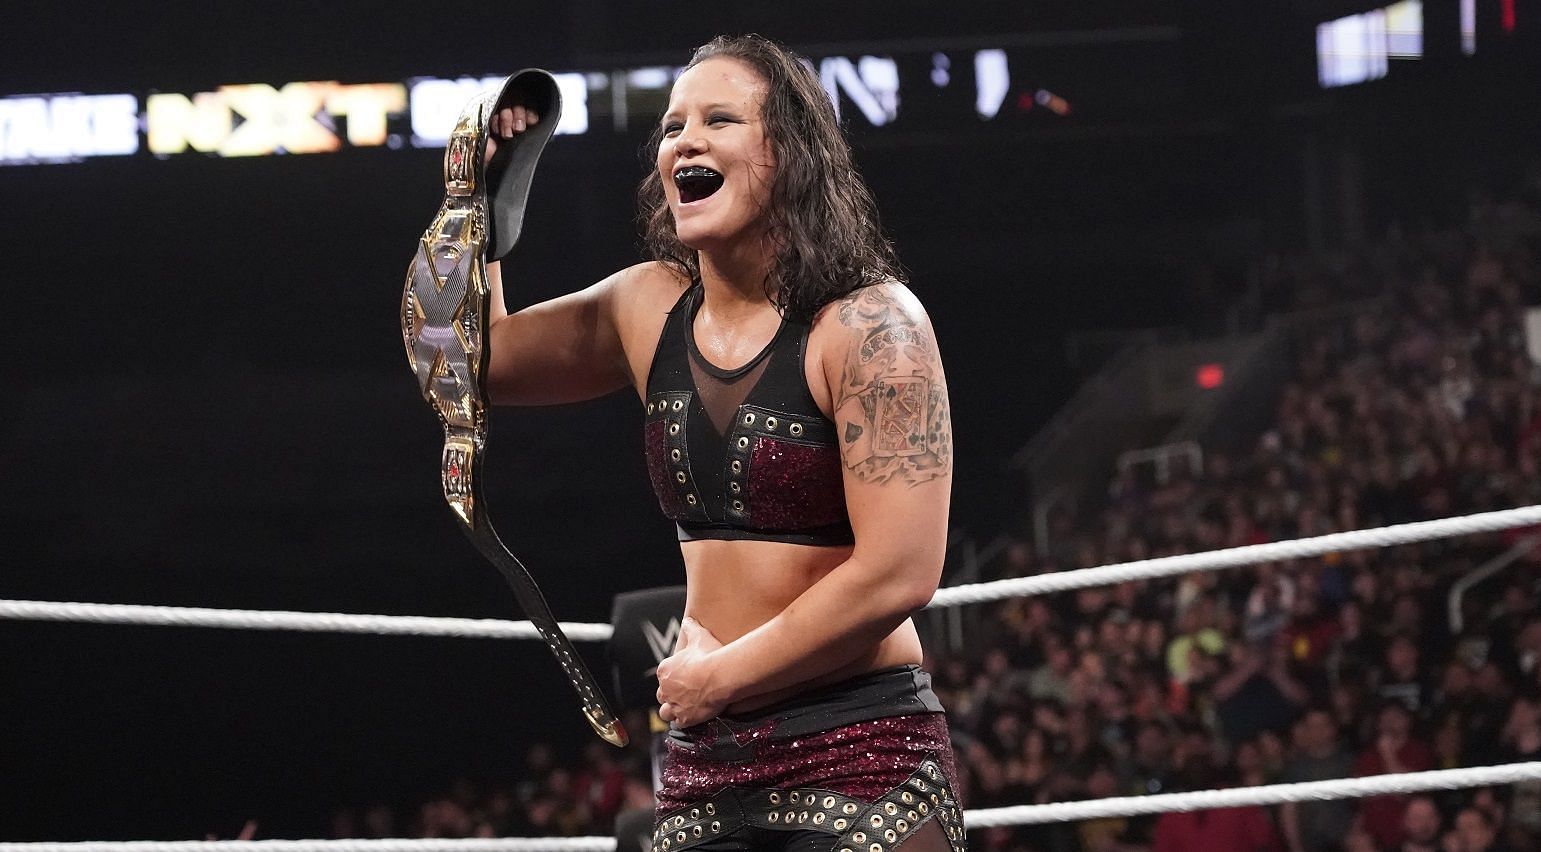 Shayna Baszler has been in WWE since 2017.